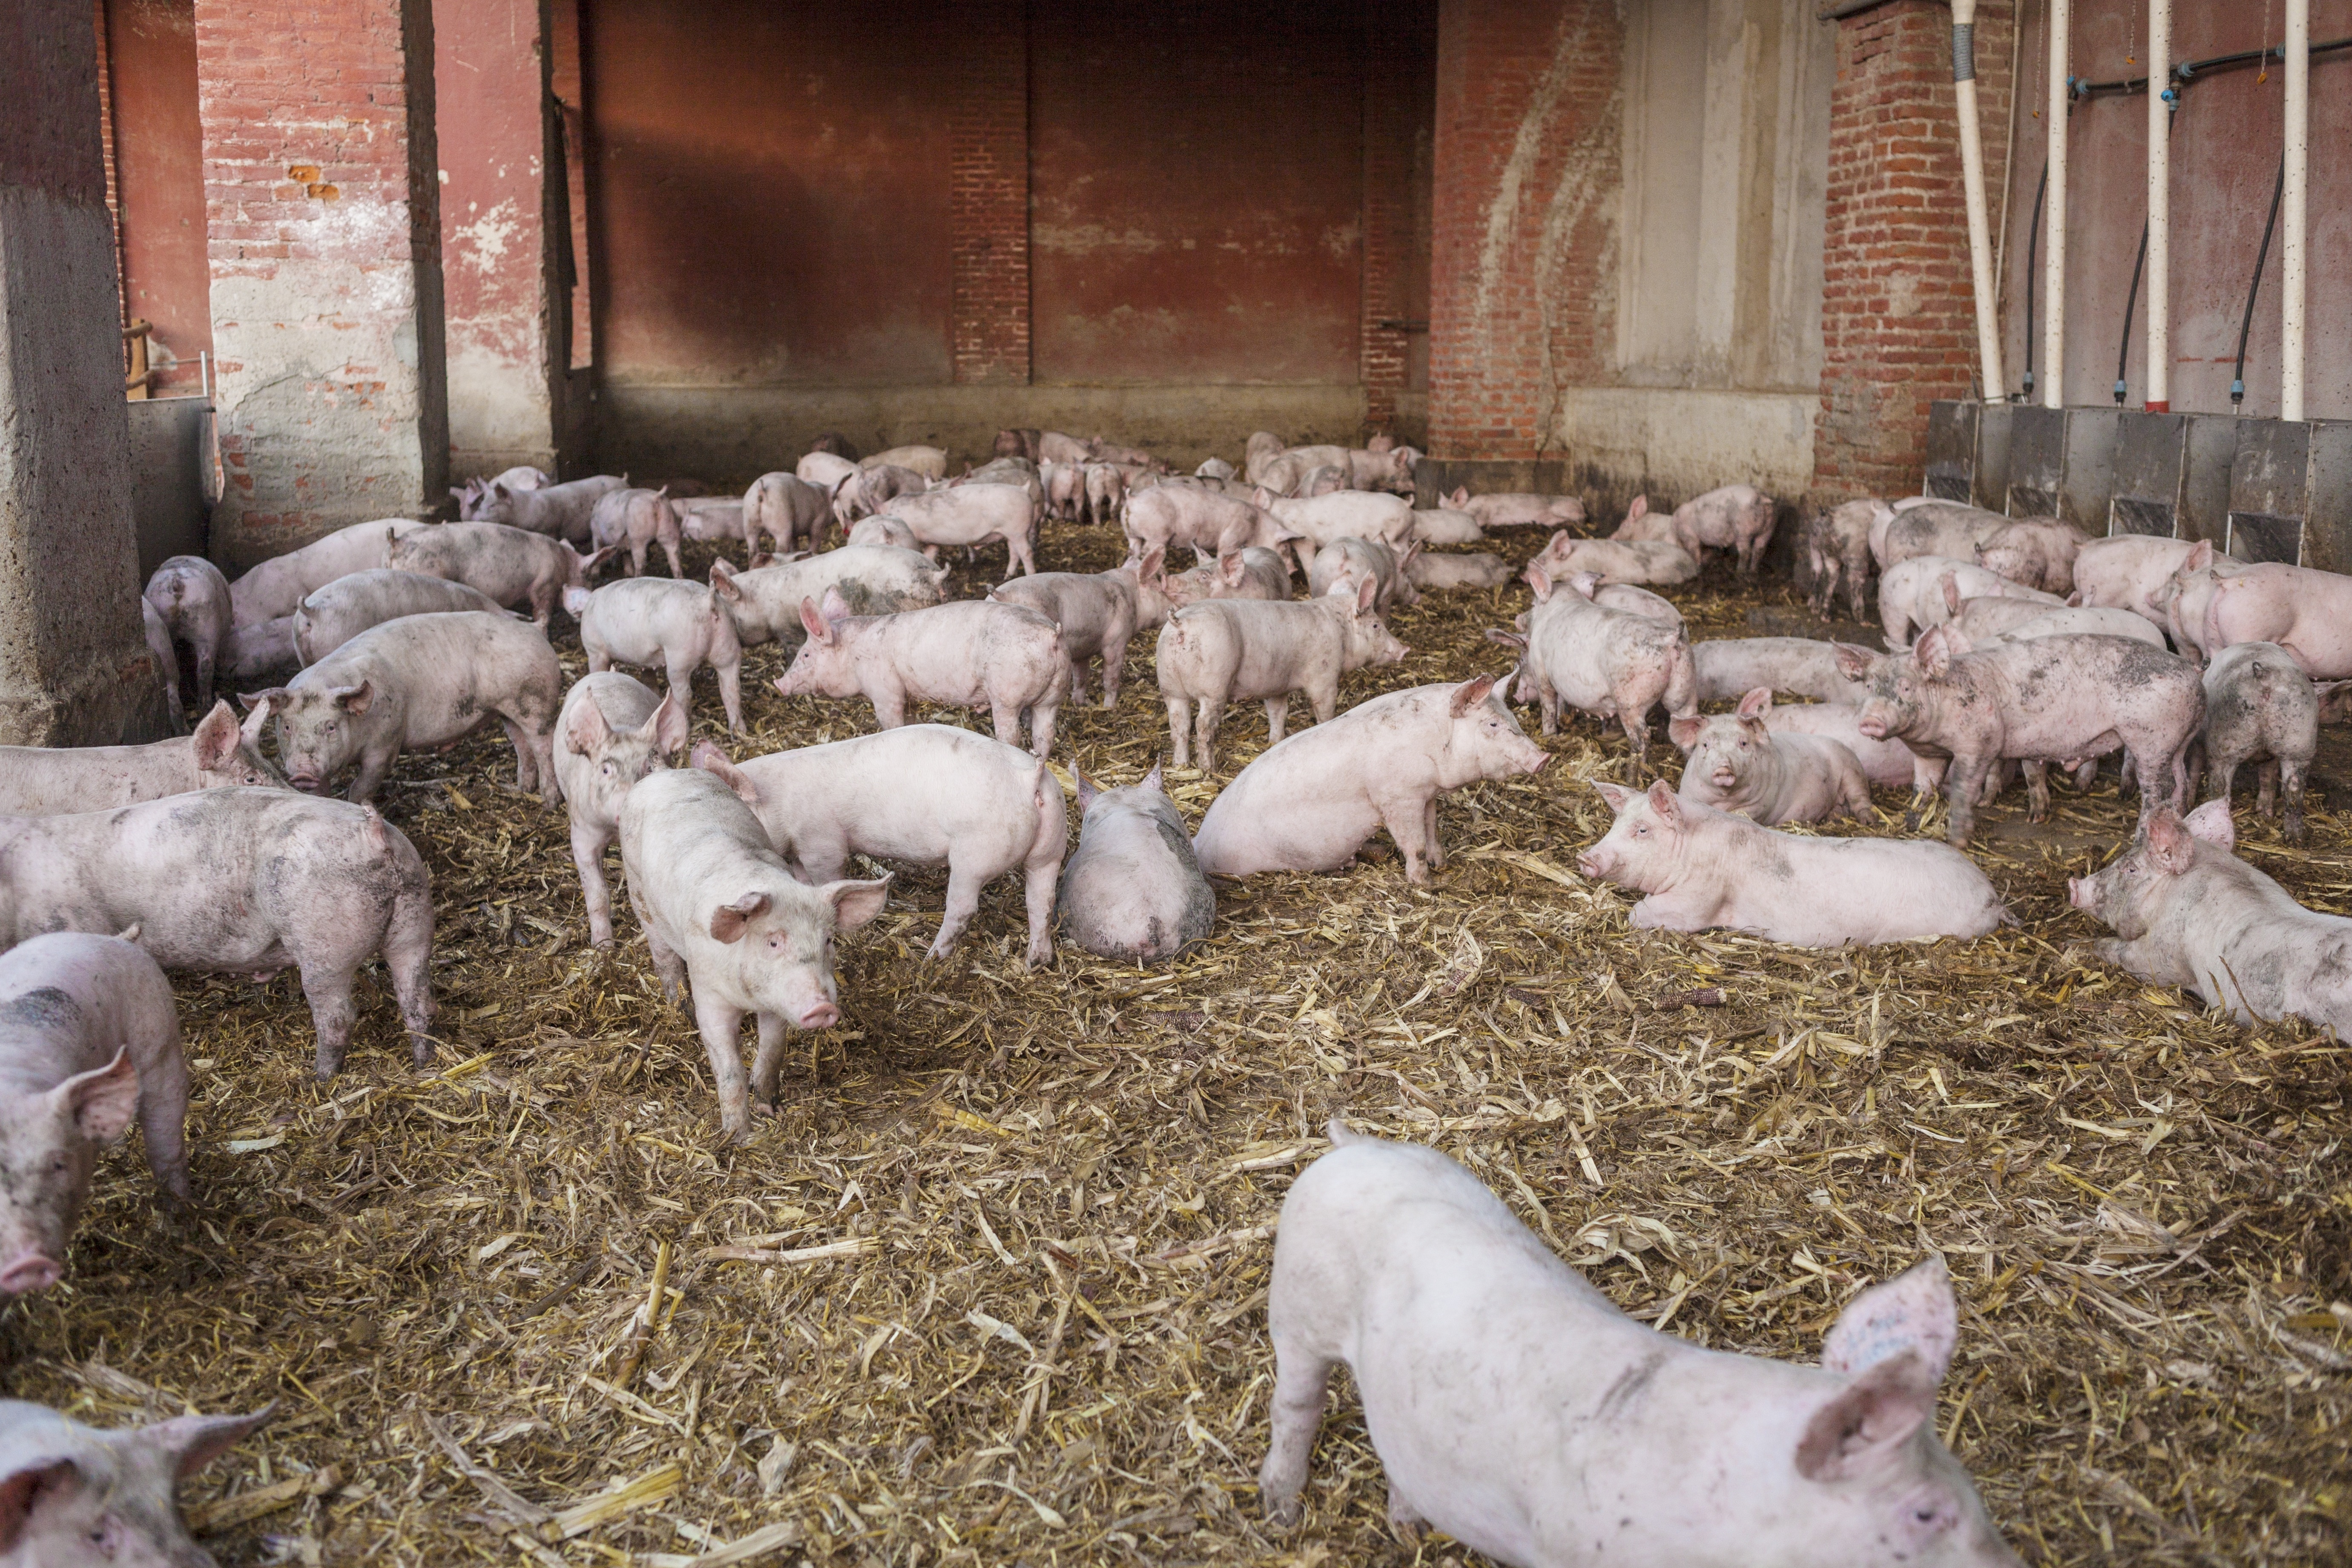 many pigs inside a pig barn with straw